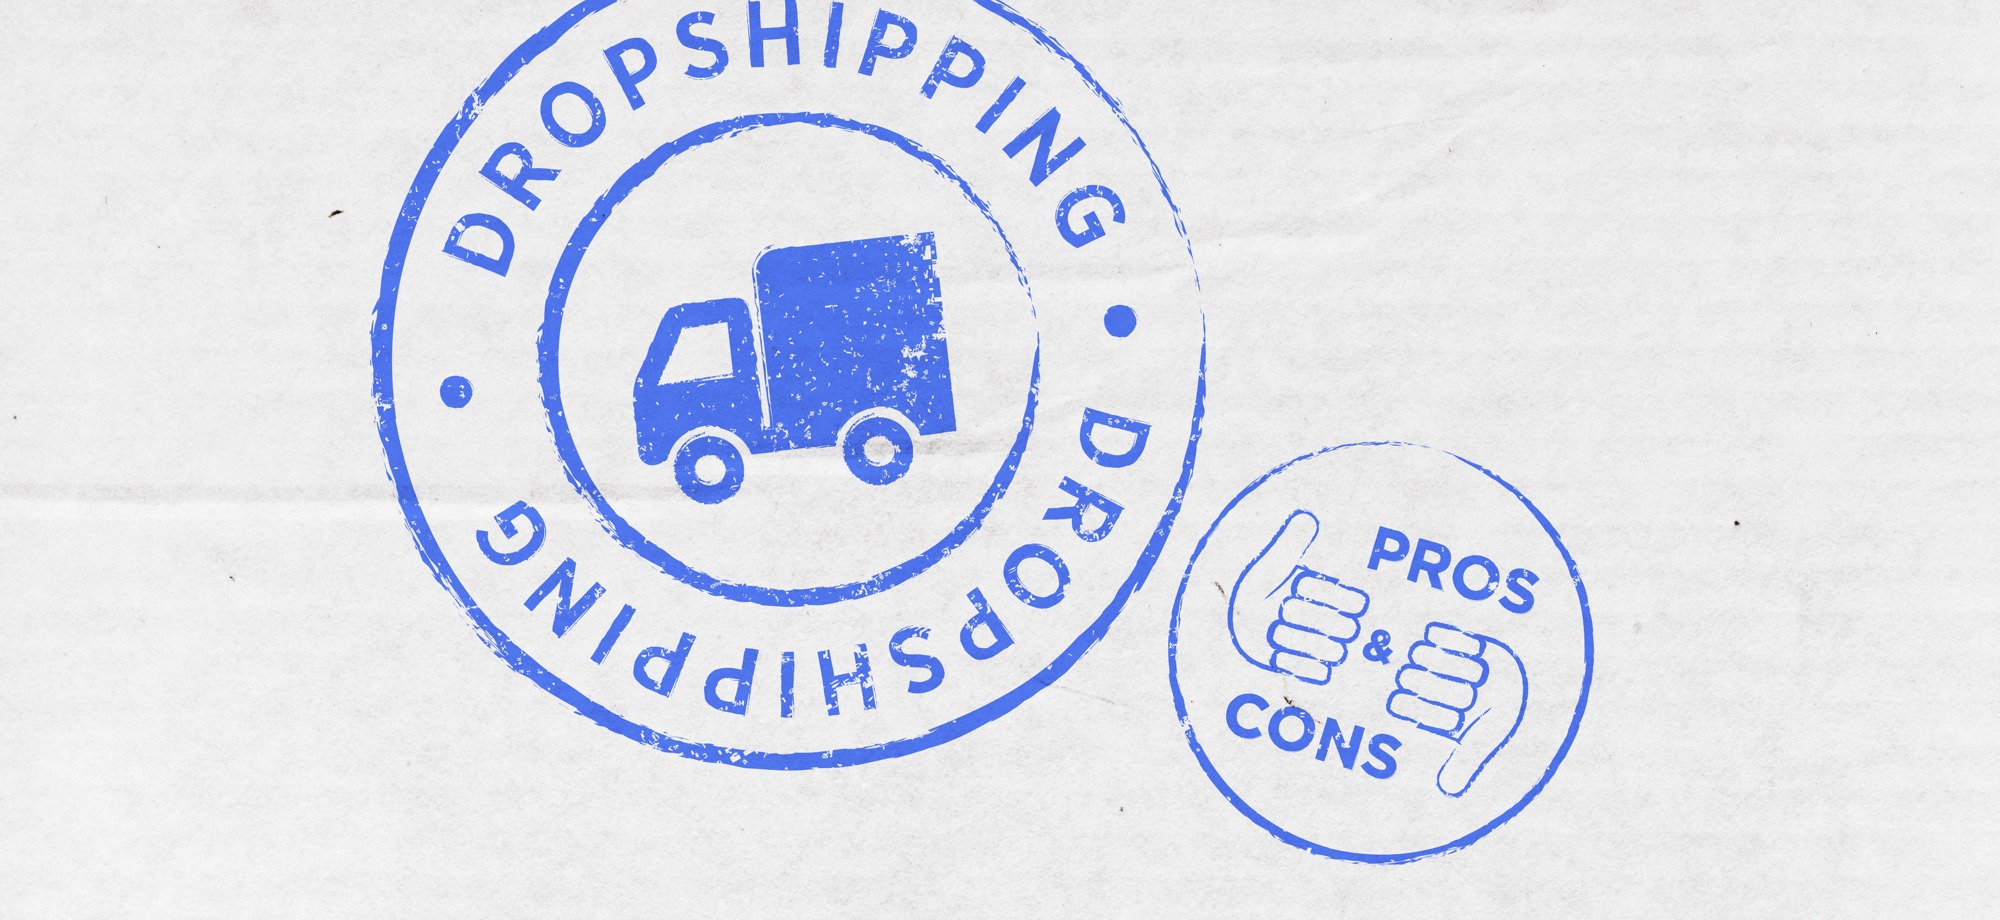 Drop Shipping Spreadsheet throughout Dropshipping In 2019: Does It Actually Work? Pros + Cons